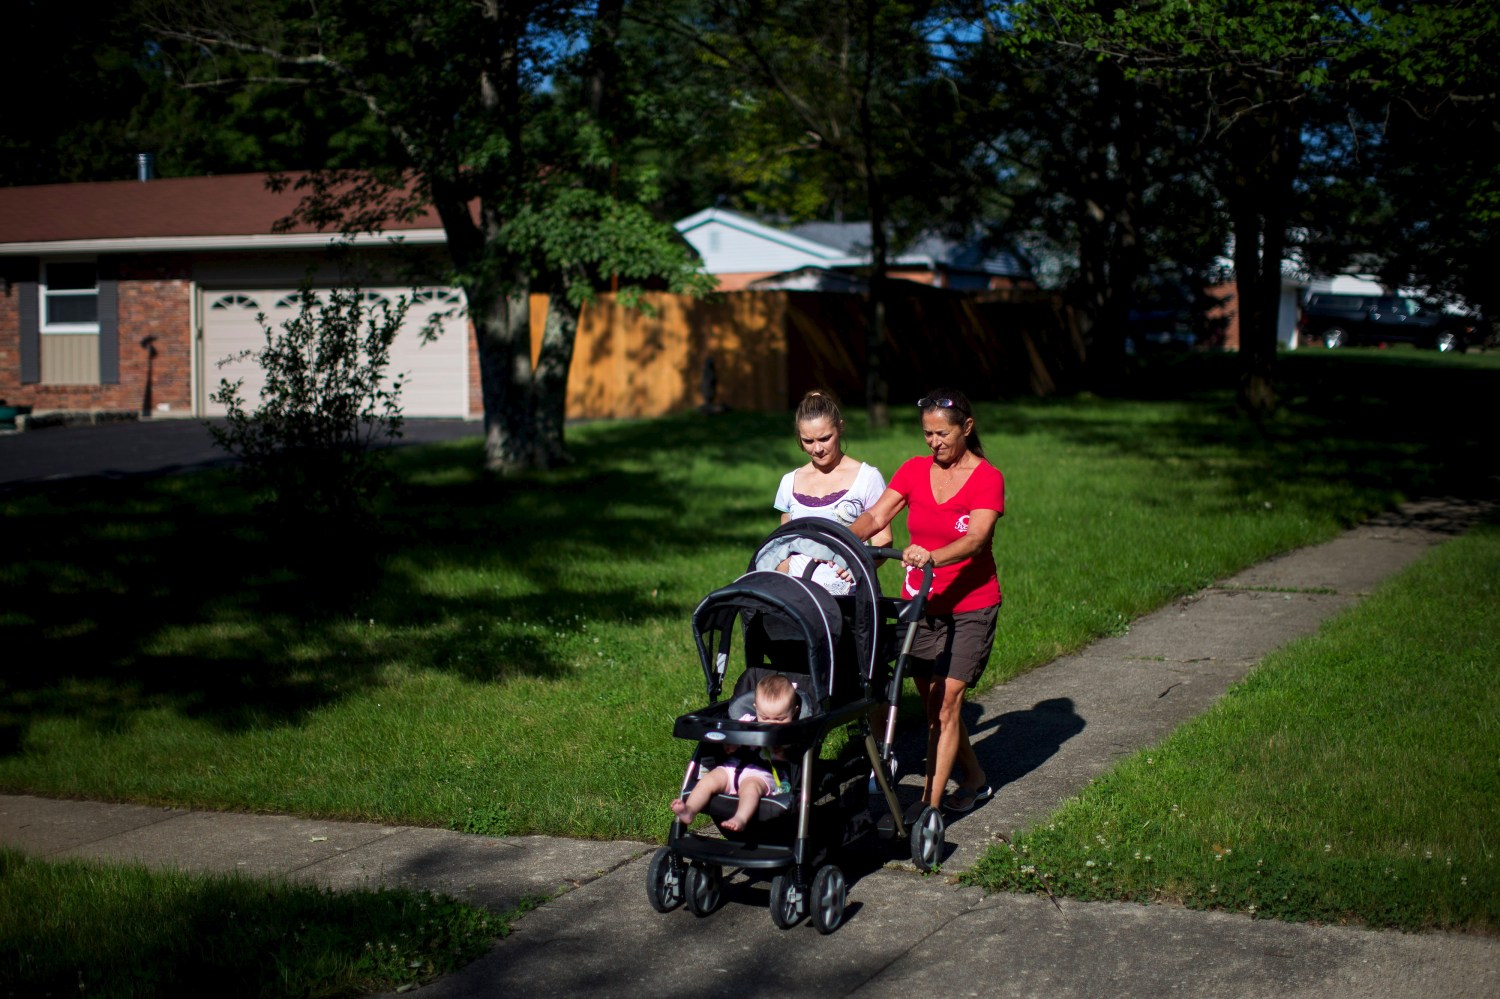 Heather Padgett, with her mother Debi Padgett (R), takes her daughters Kinsley and Kiley for a walk outside their home in Cincinnati, Ohio July 16, 2015. Until she got clean last August, Heather was part of what the Centers for Disease Control has called a heroin epidemic - a 100 percent rise in heroin addiction among Americans between 2002 and 2013. The sharp rise in heroin addiction, coupled with the risks of newborns developing withdrawal symptoms after they are sent home, has led a group of Cincinnati hospitals to try what they say is the first program of its kind in the United States: testing all mothers, or their infants, for opiates regardless of background, not just those who seem high-risk. To match Feature USA-HEROIN/MATERNALTESTING  Picture taken July 16, 2015.  REUTERS/Aaron P. Bernstein - GF20000015645